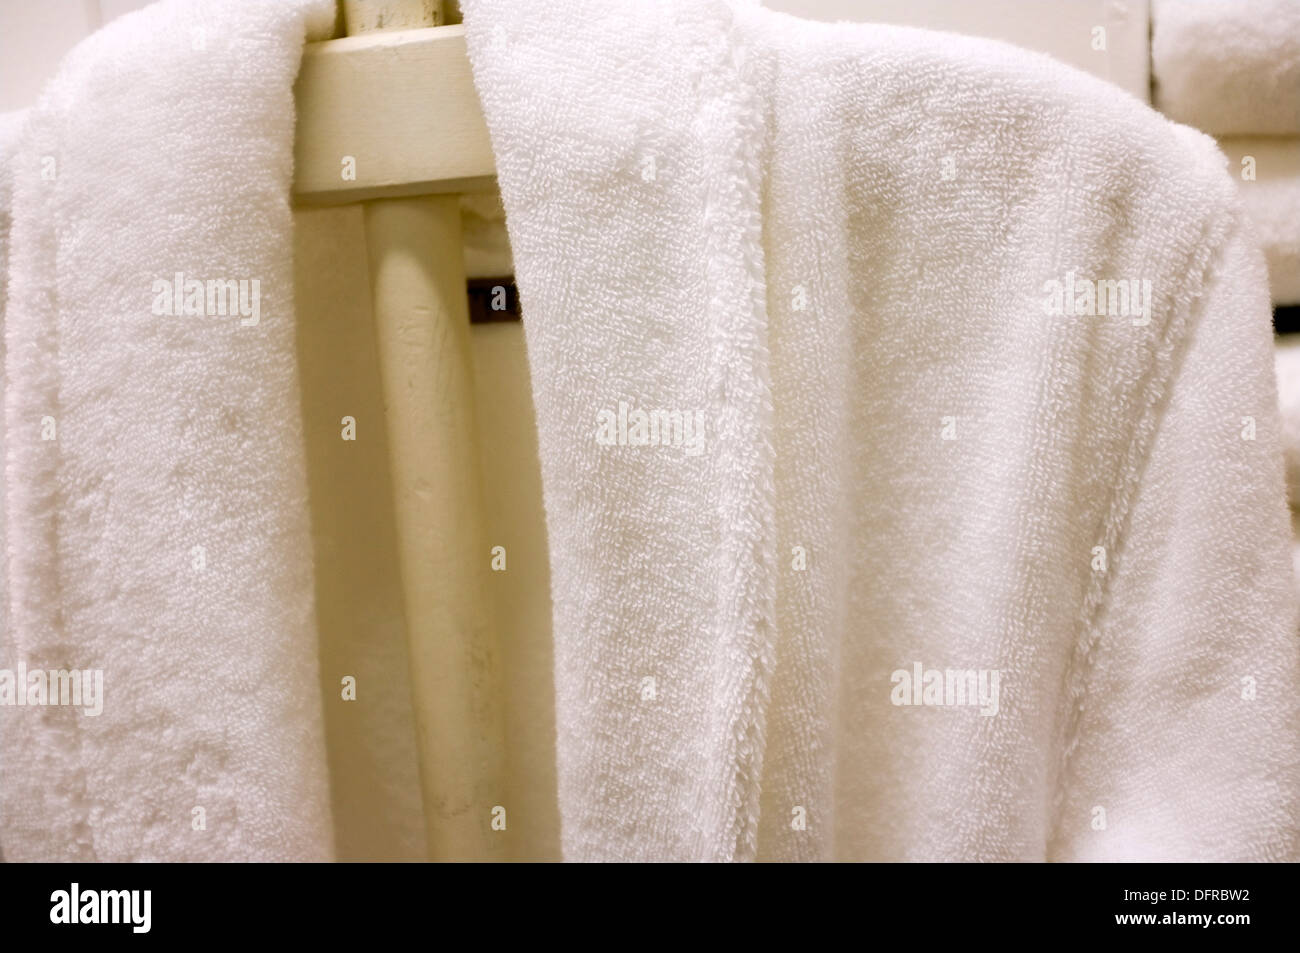 https://c8.alamy.com/comp/DFRBW2/white-cotton-terry-cloth-bath-robe-hanging-in-a-retail-store-display-DFRBW2.jpg